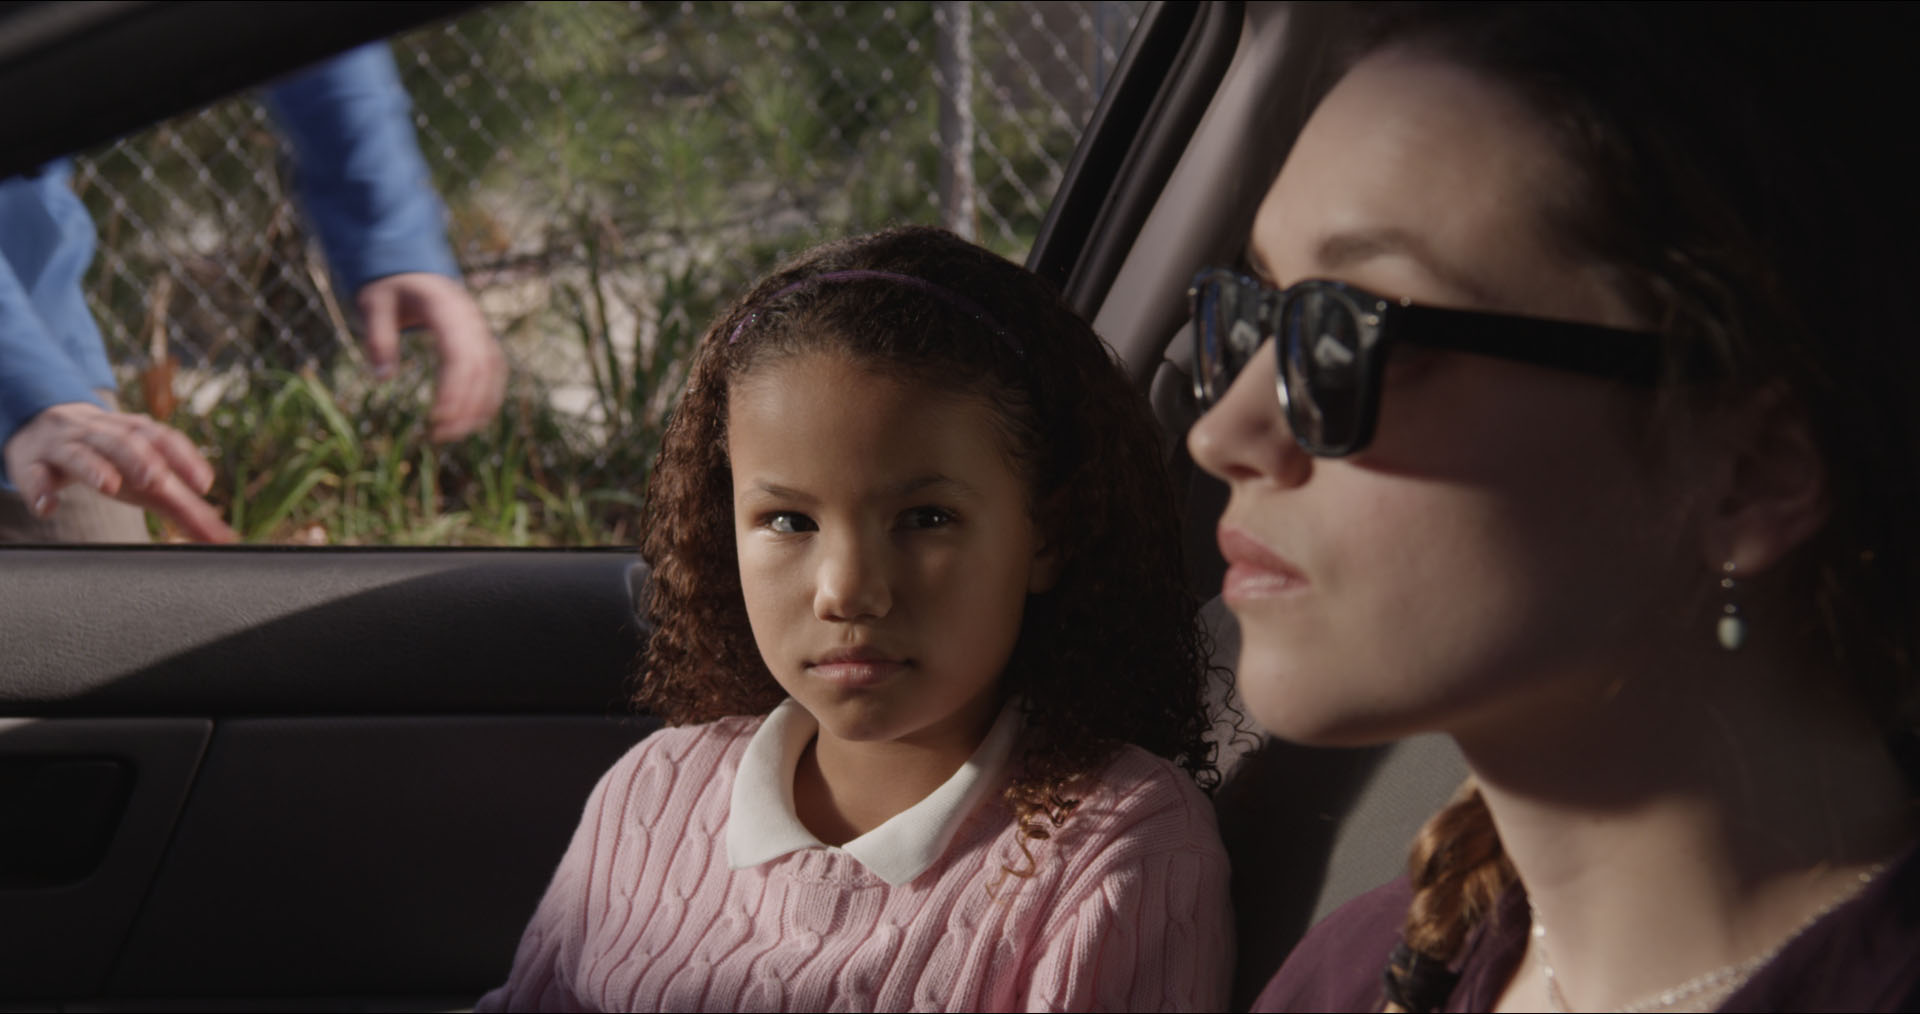 Tia (played by Alessandra Shelby Farmer) gets a ride to school from her new stepsister Carrie (played by Kerry Knuppe) in independent thriller HOME.